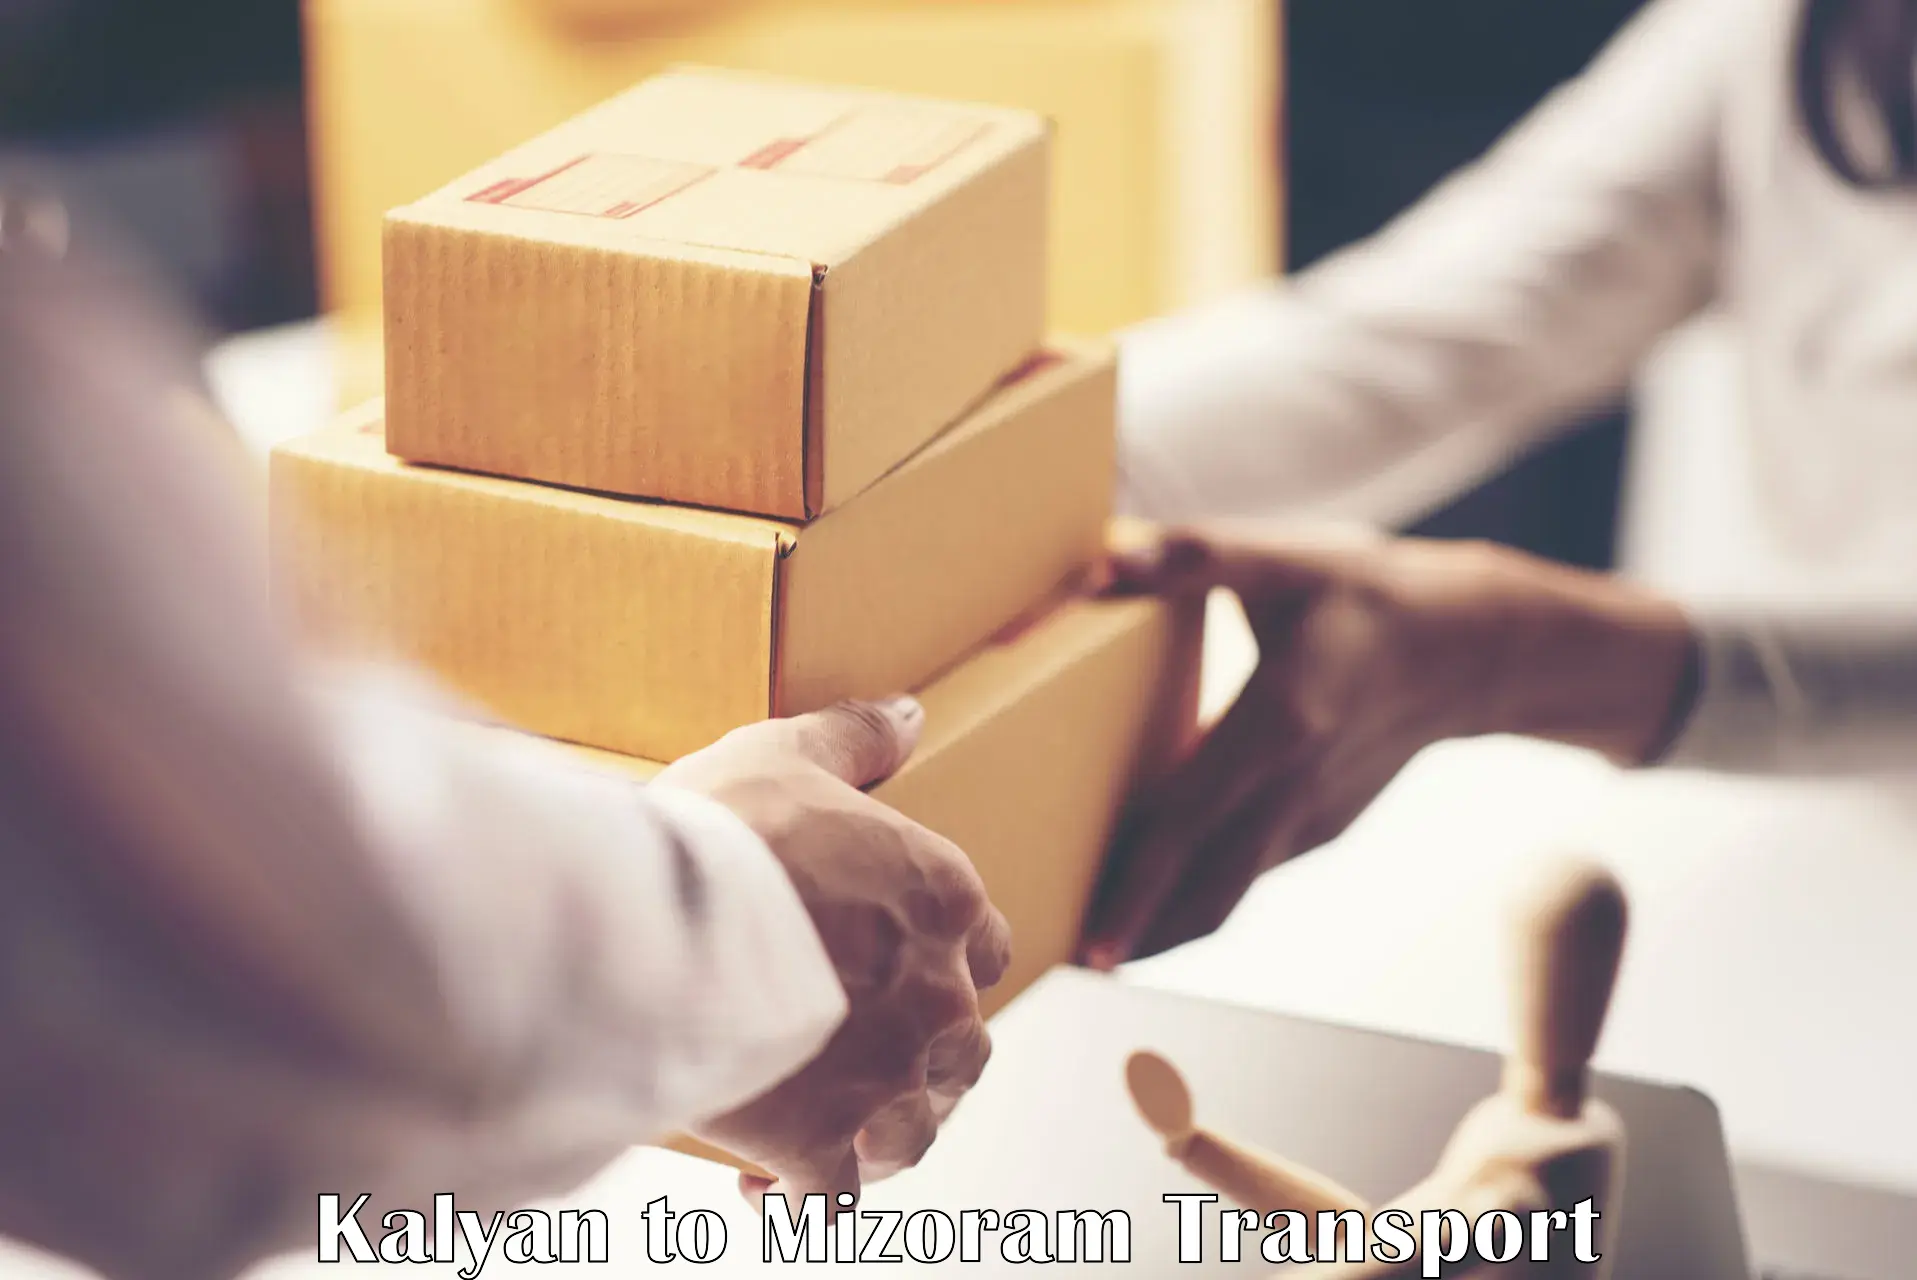 Goods delivery service Kalyan to Darlawn